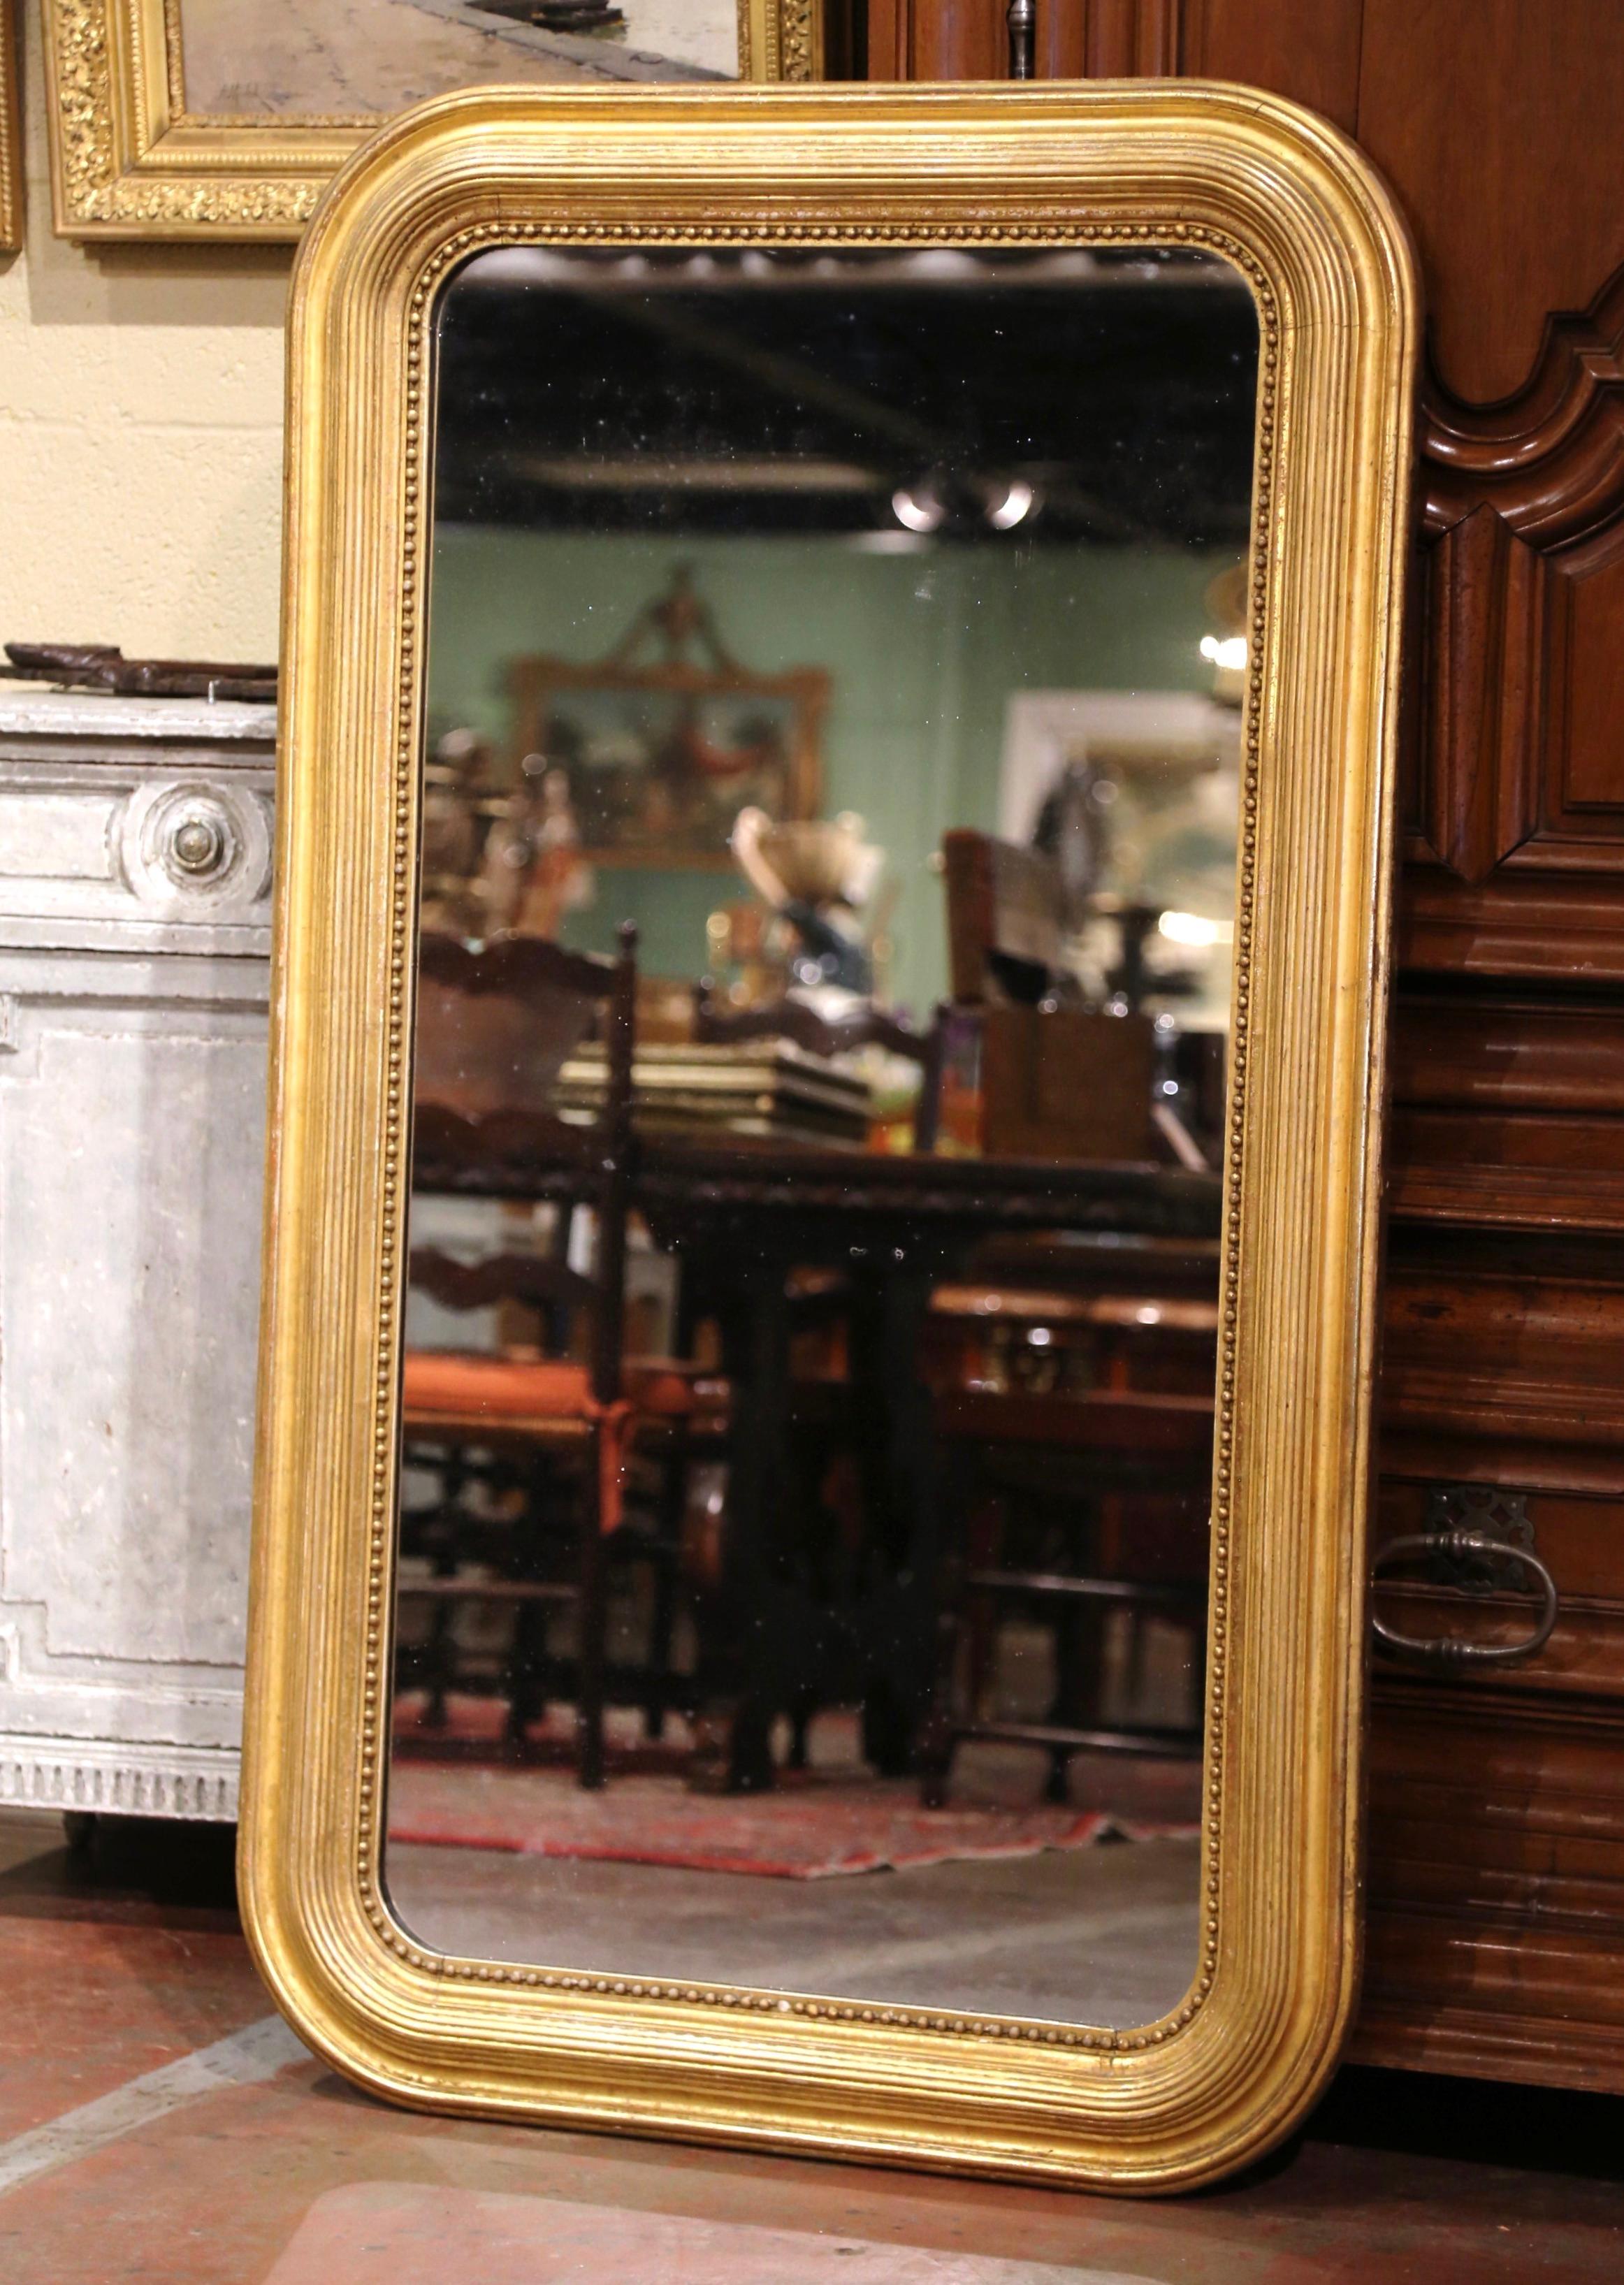 Versatile, this Louis Philippe mirror could be hung horizontally or vertically in a number of rooms for a traditional French style, including over a mantel, or in a horizontal position over a long buffet or console. Crafted in the Burgundy region of